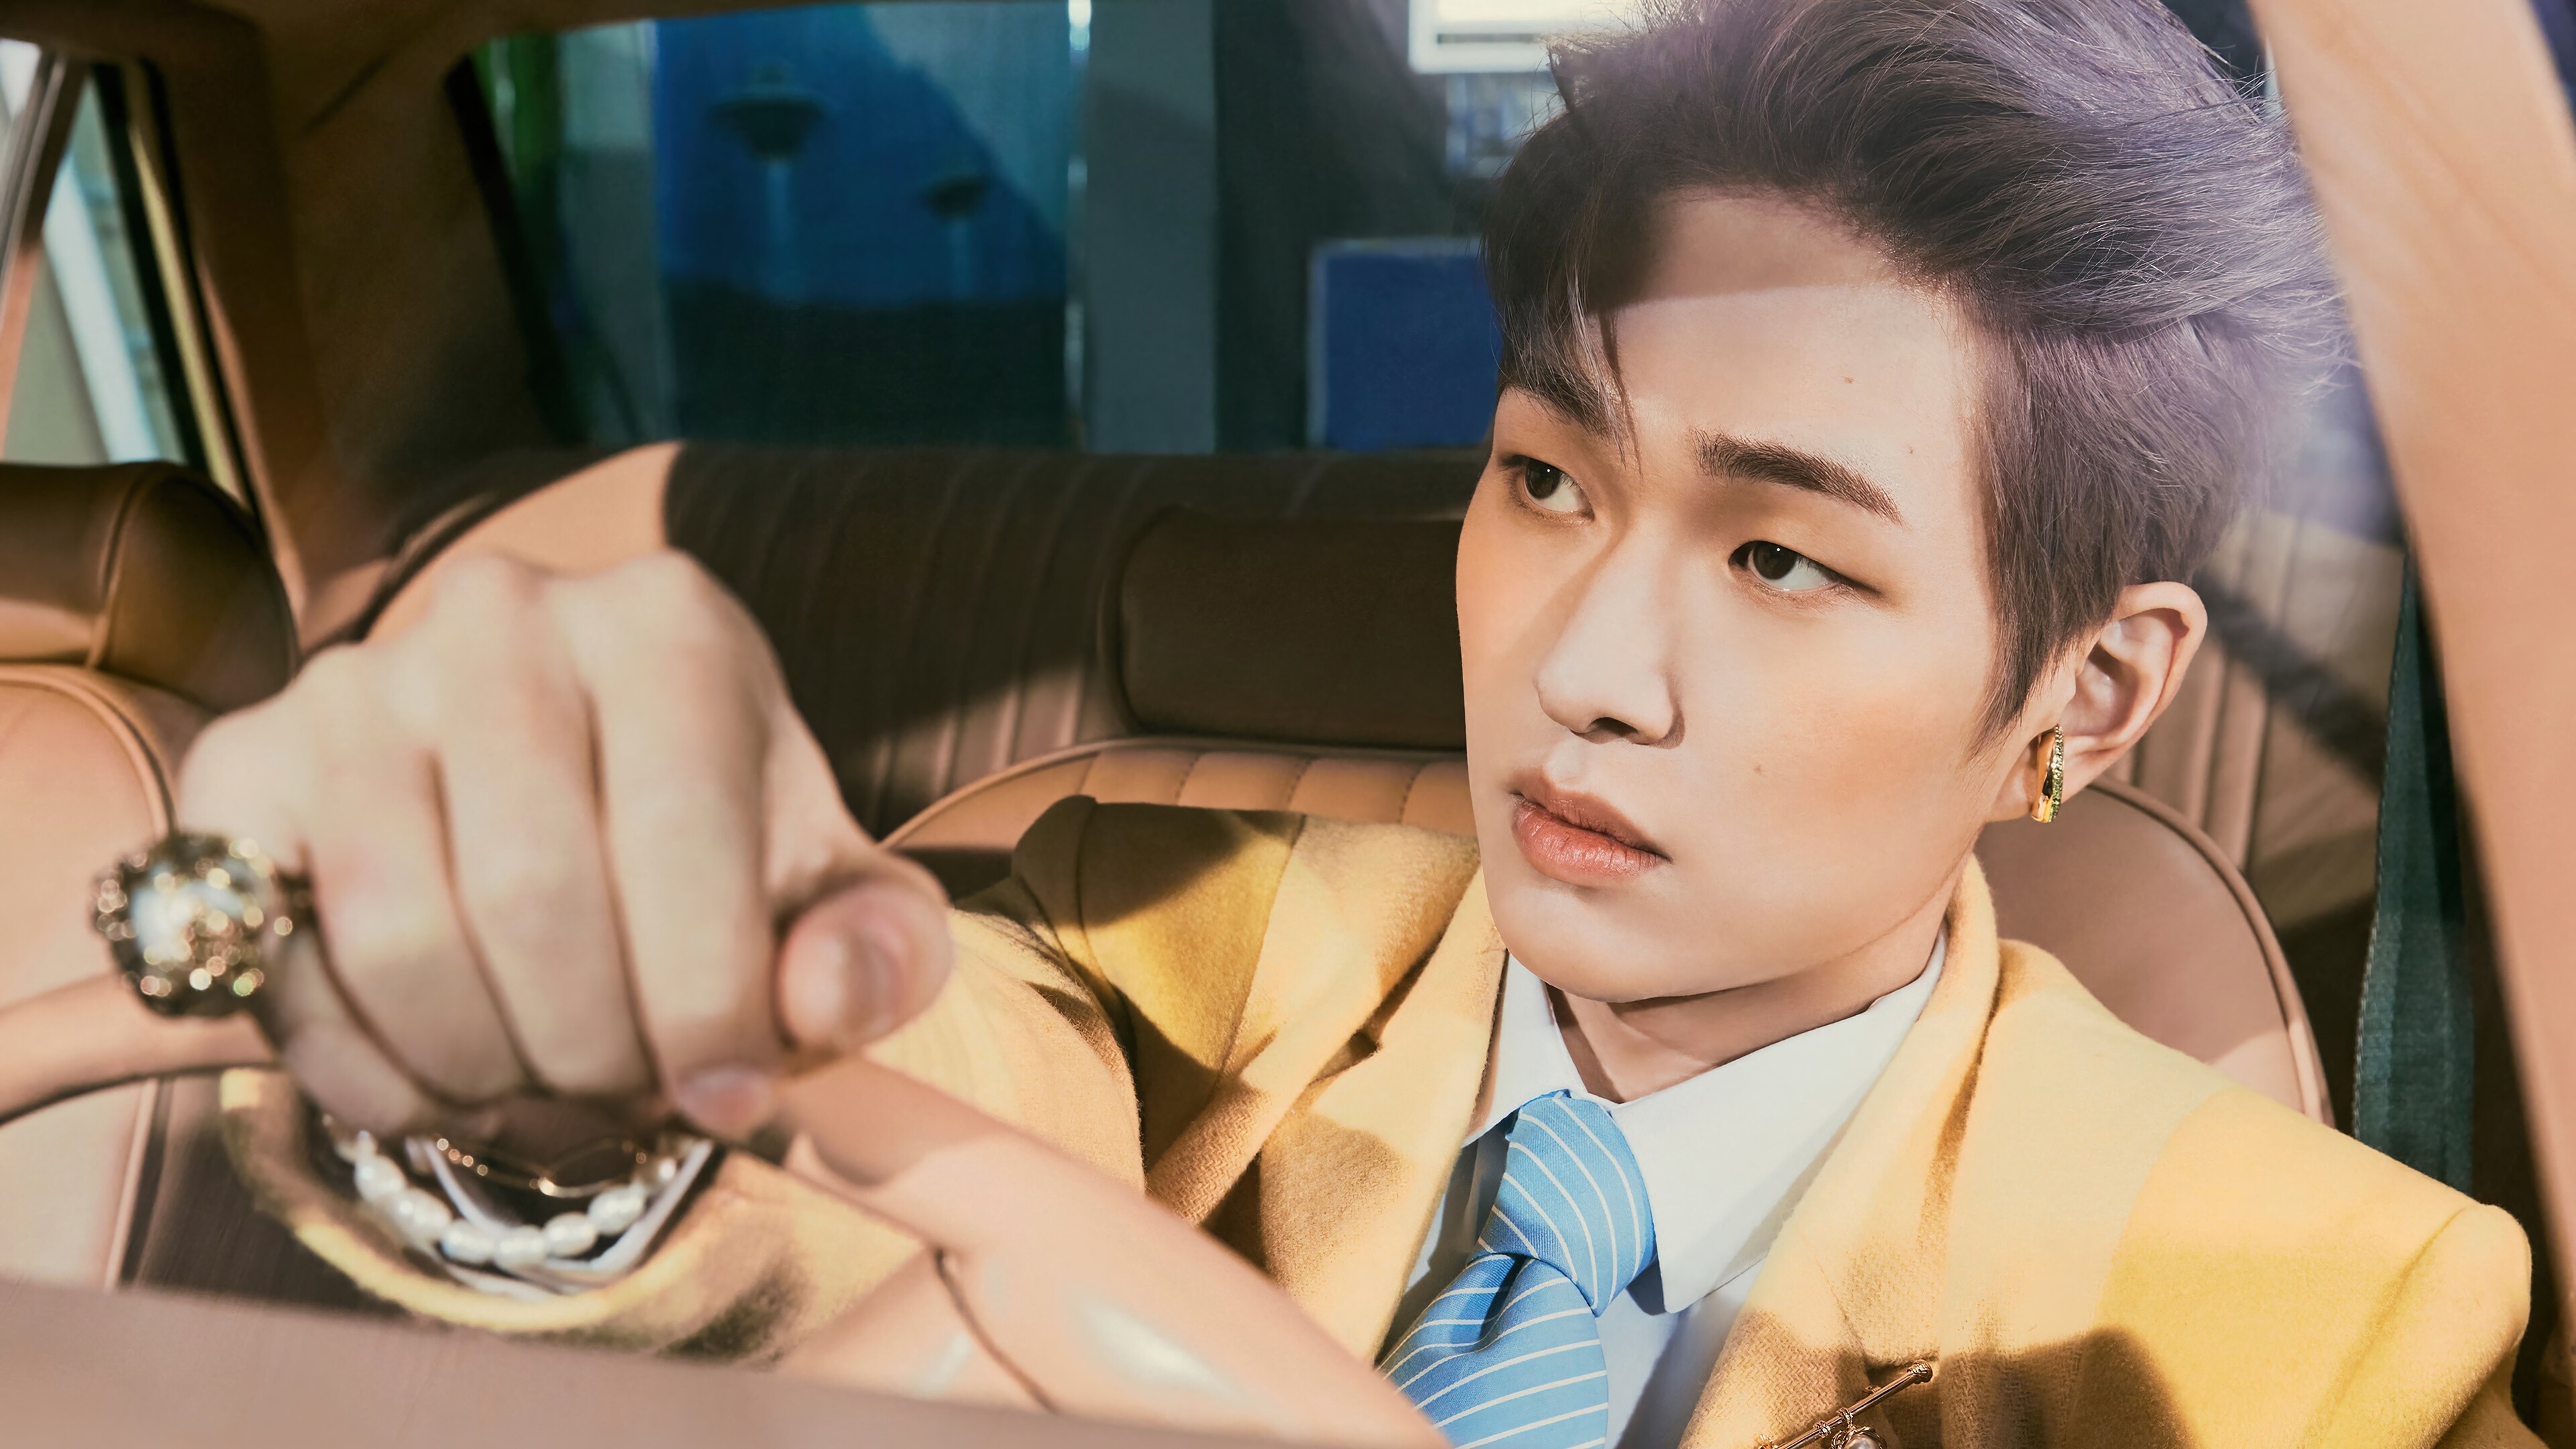 SHINee: Onew, debuted as the lead vocalist of boy group in May 2008, Don't call me. 3840x2160 4K Wallpaper.